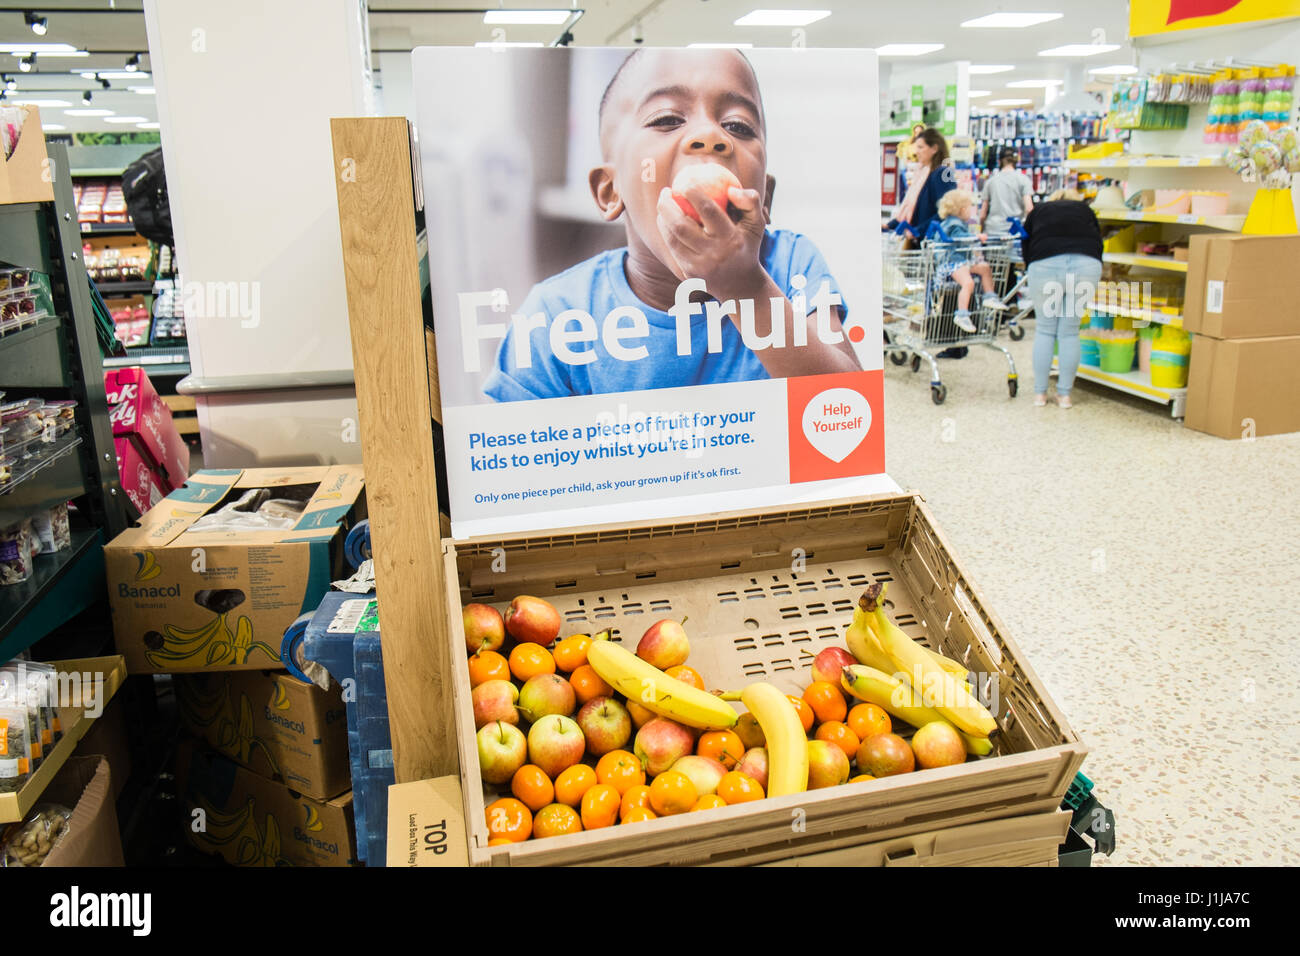 Free,fruit,for,children,healthy,health,option,Tesco,superstore,supermarket,Liverpool,Merseyside,England,City,City,Northern,North,England,English,UK. Stock Photo